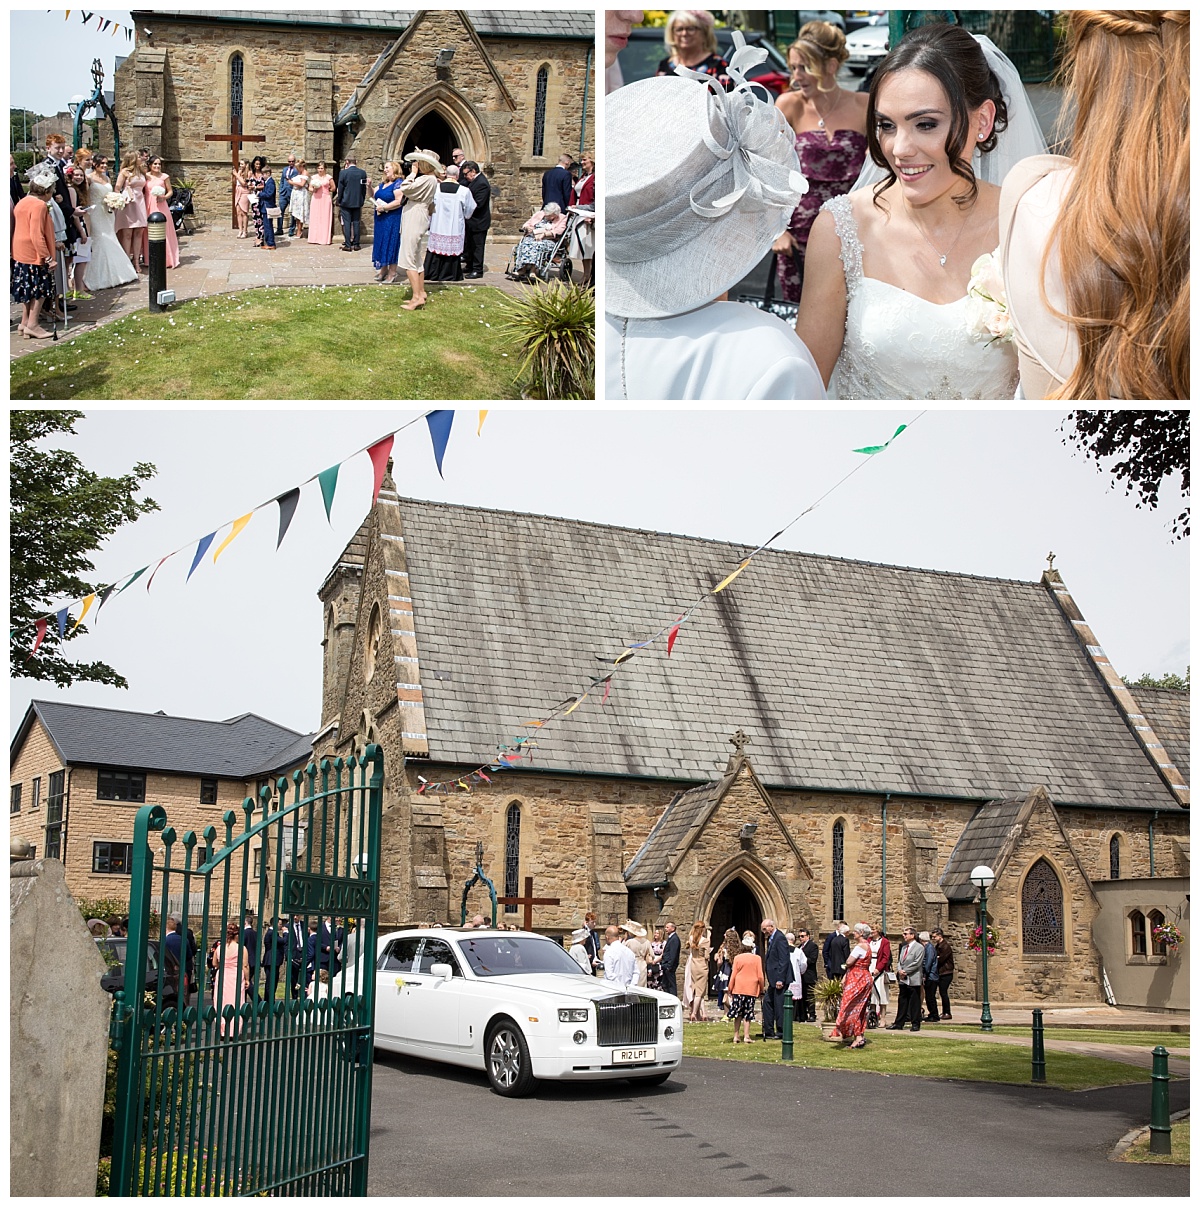 Wedding Photography Manchester - Victoria and Phillips Shireburn Arms wedding 36